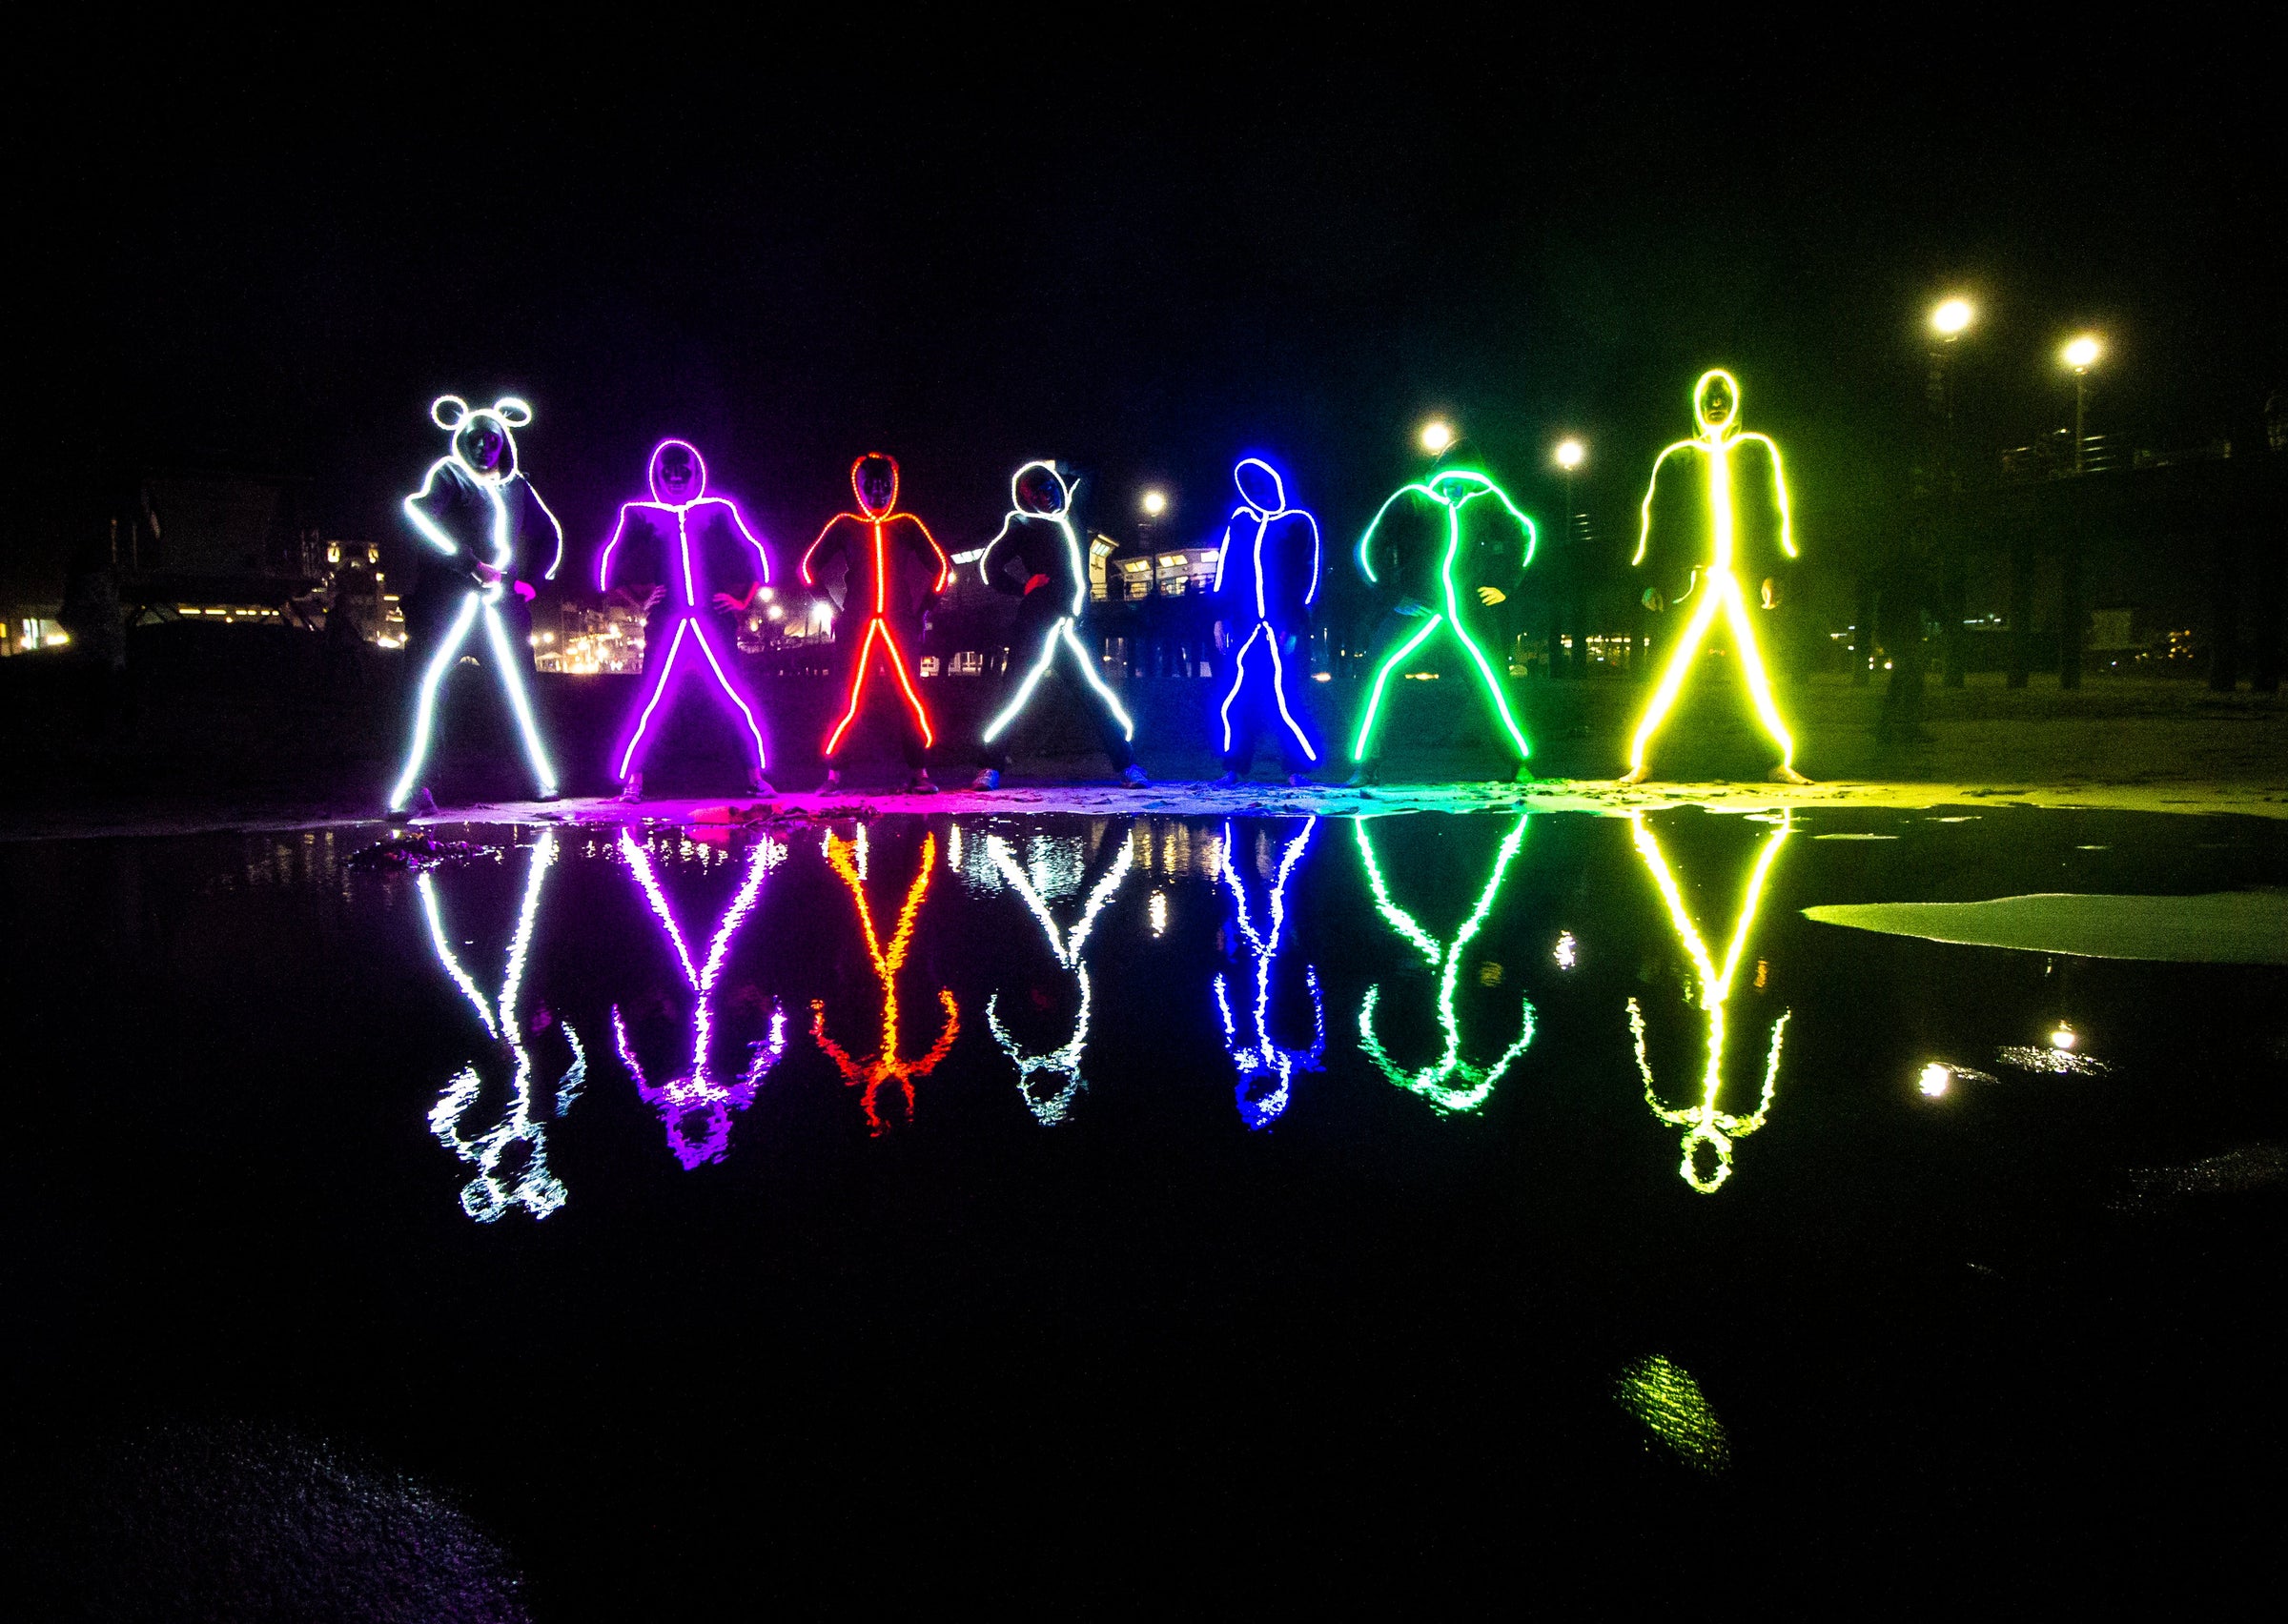 LED Stick Figures standing together in various colors